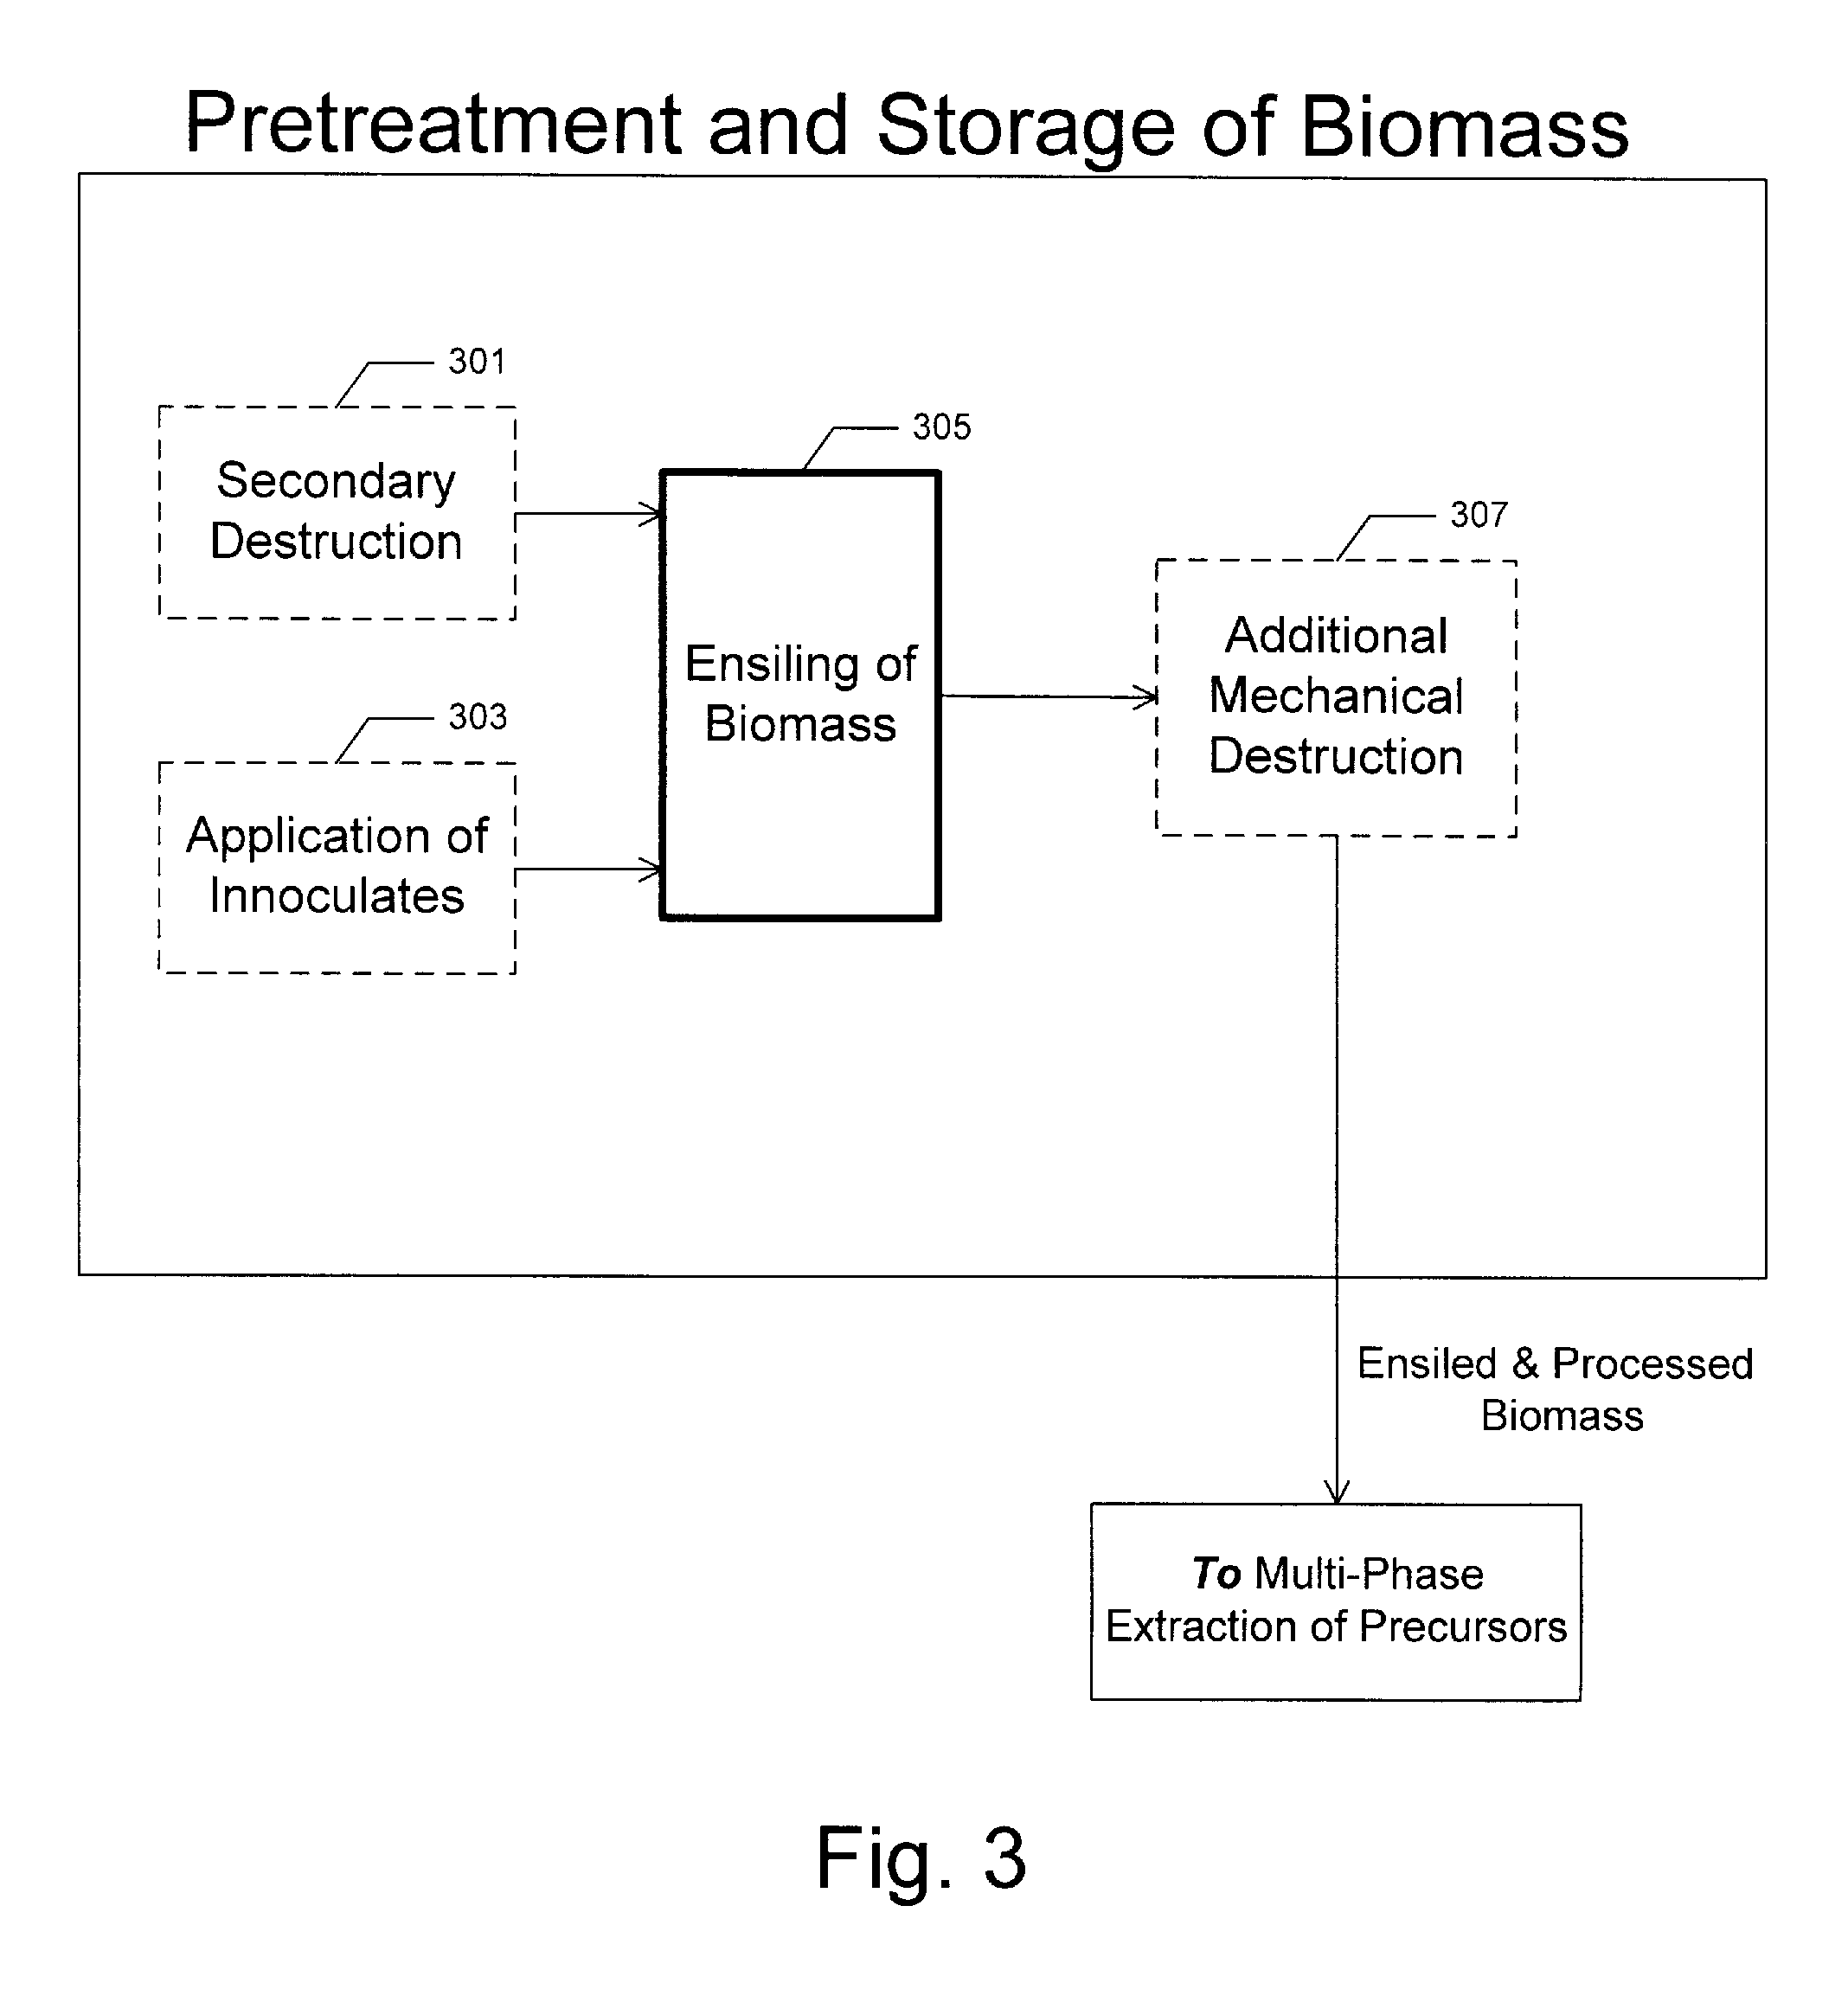 Ensiling Biomass For Biofuels Production And Multiple Phase Apparatus For Hydrolyzation Of Ensiled Biomass